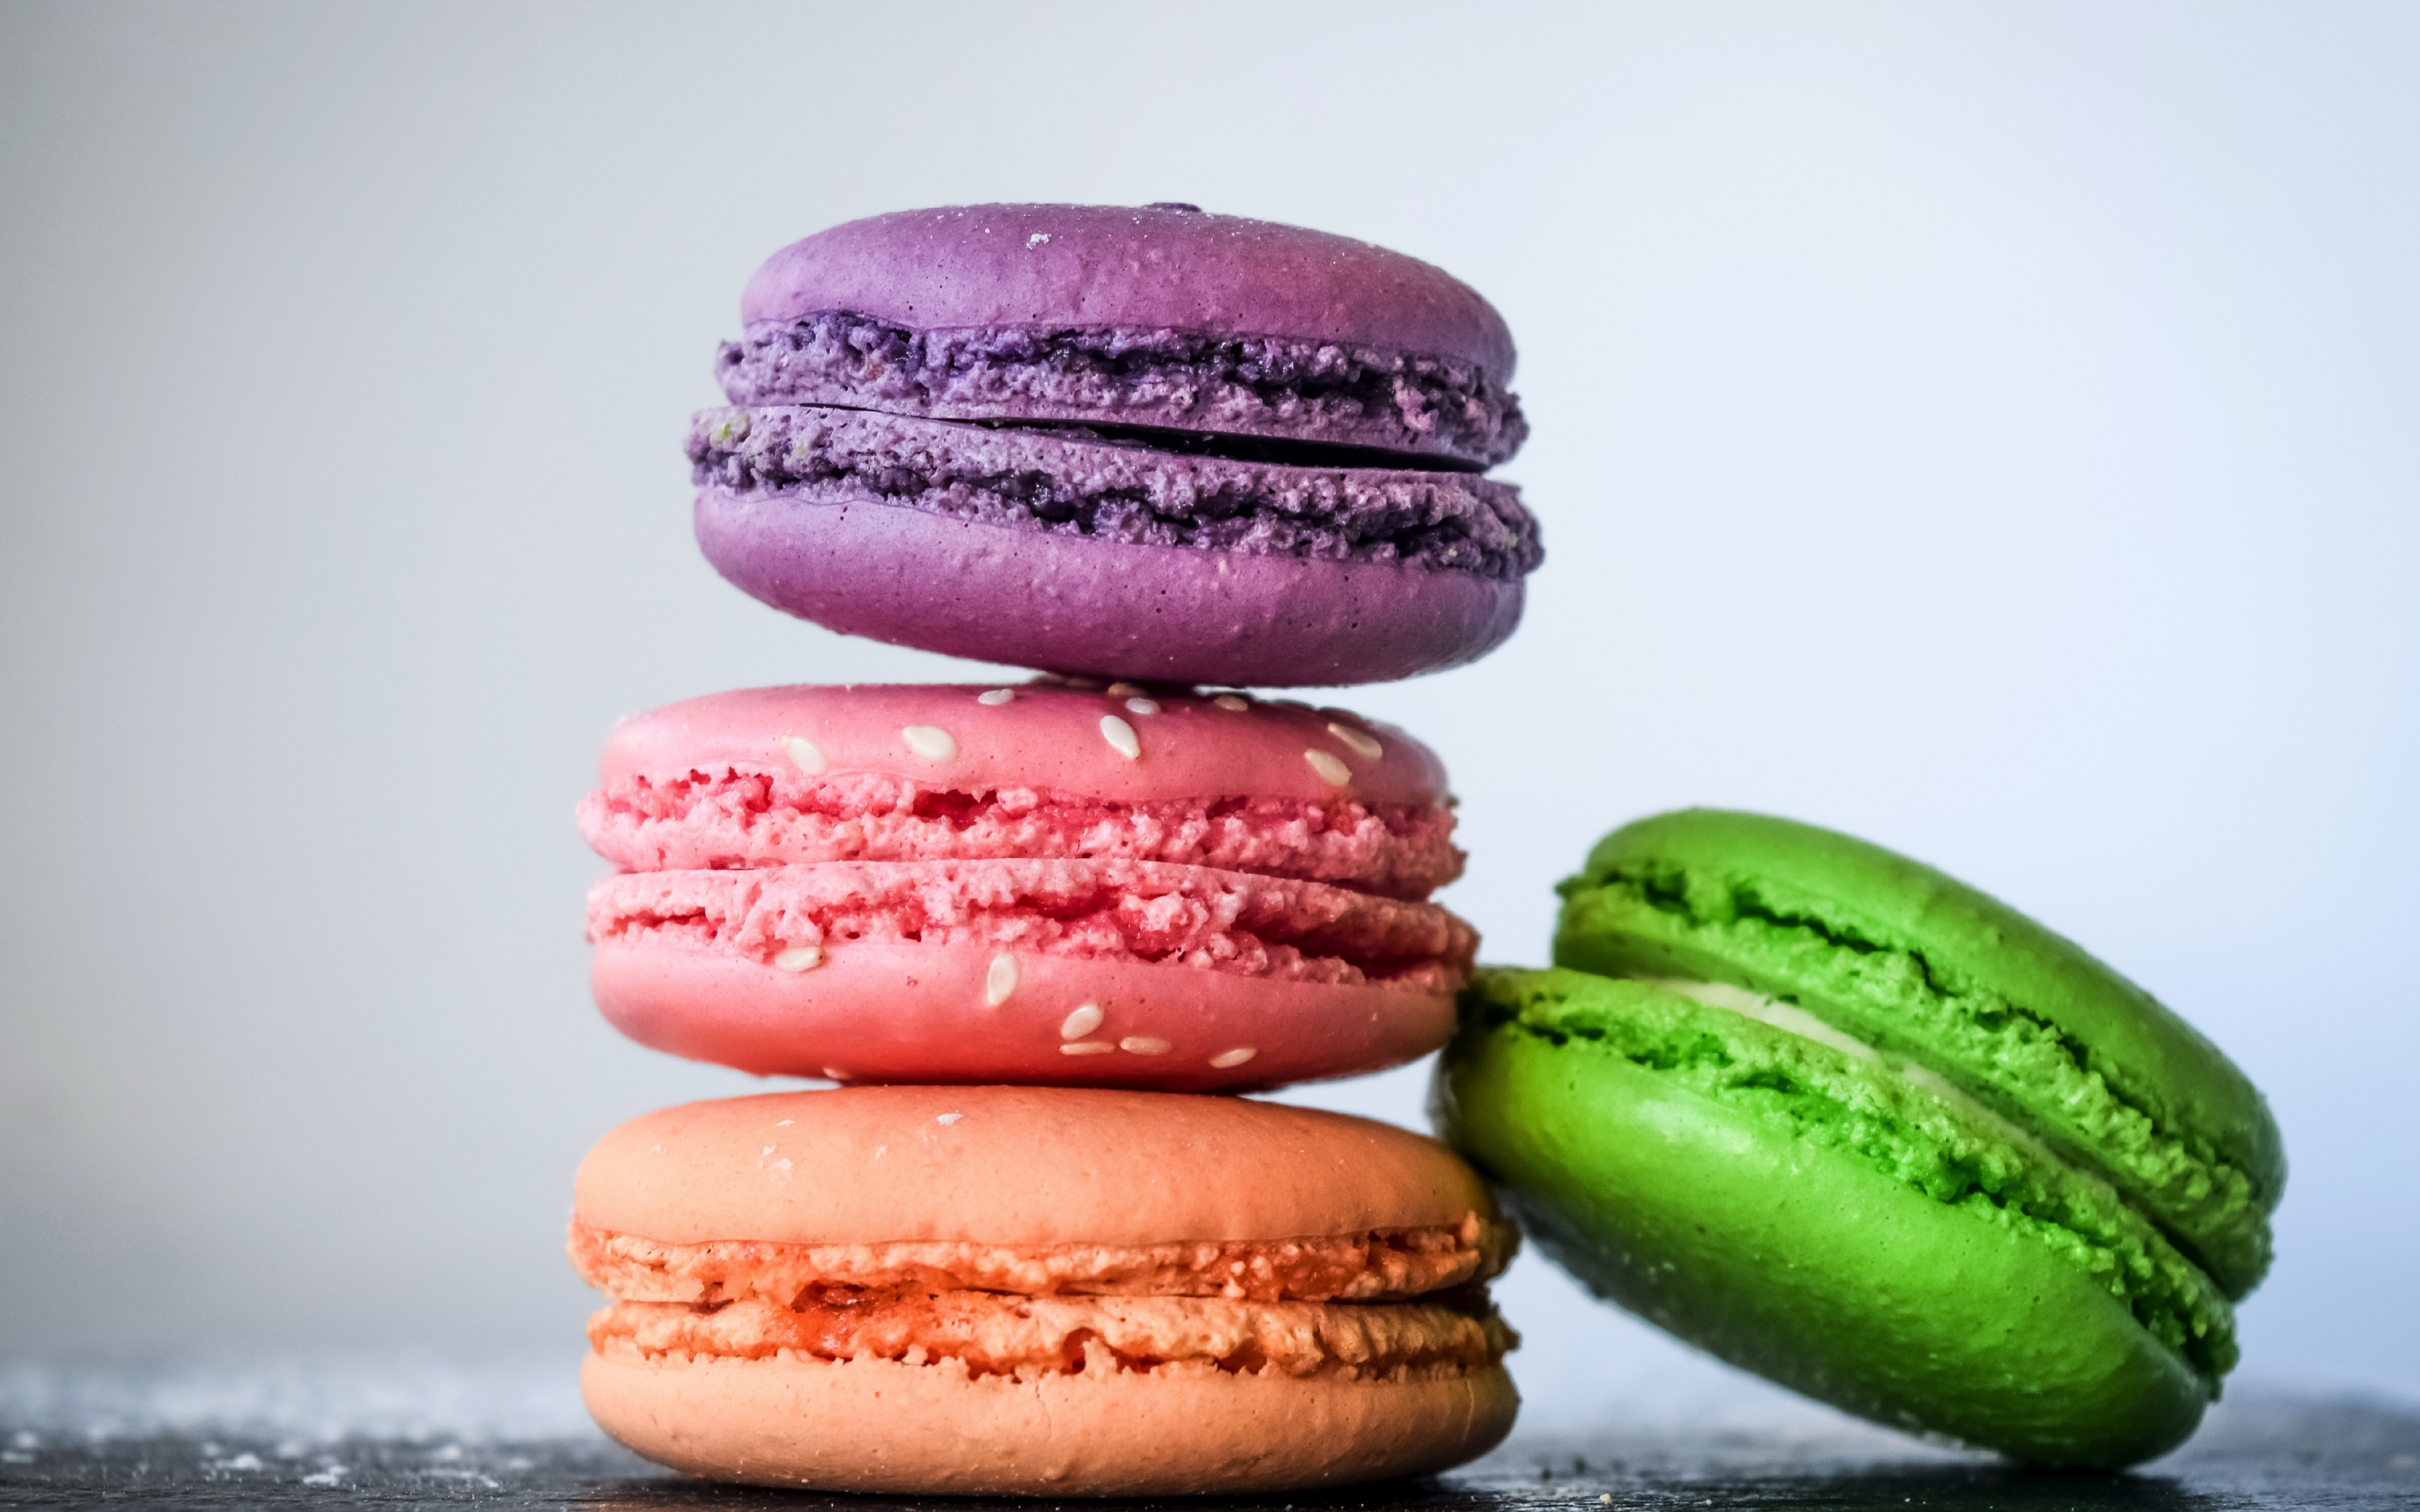 Download 3840x2400 macarons, food, sweets, close up, colorful 4k ...